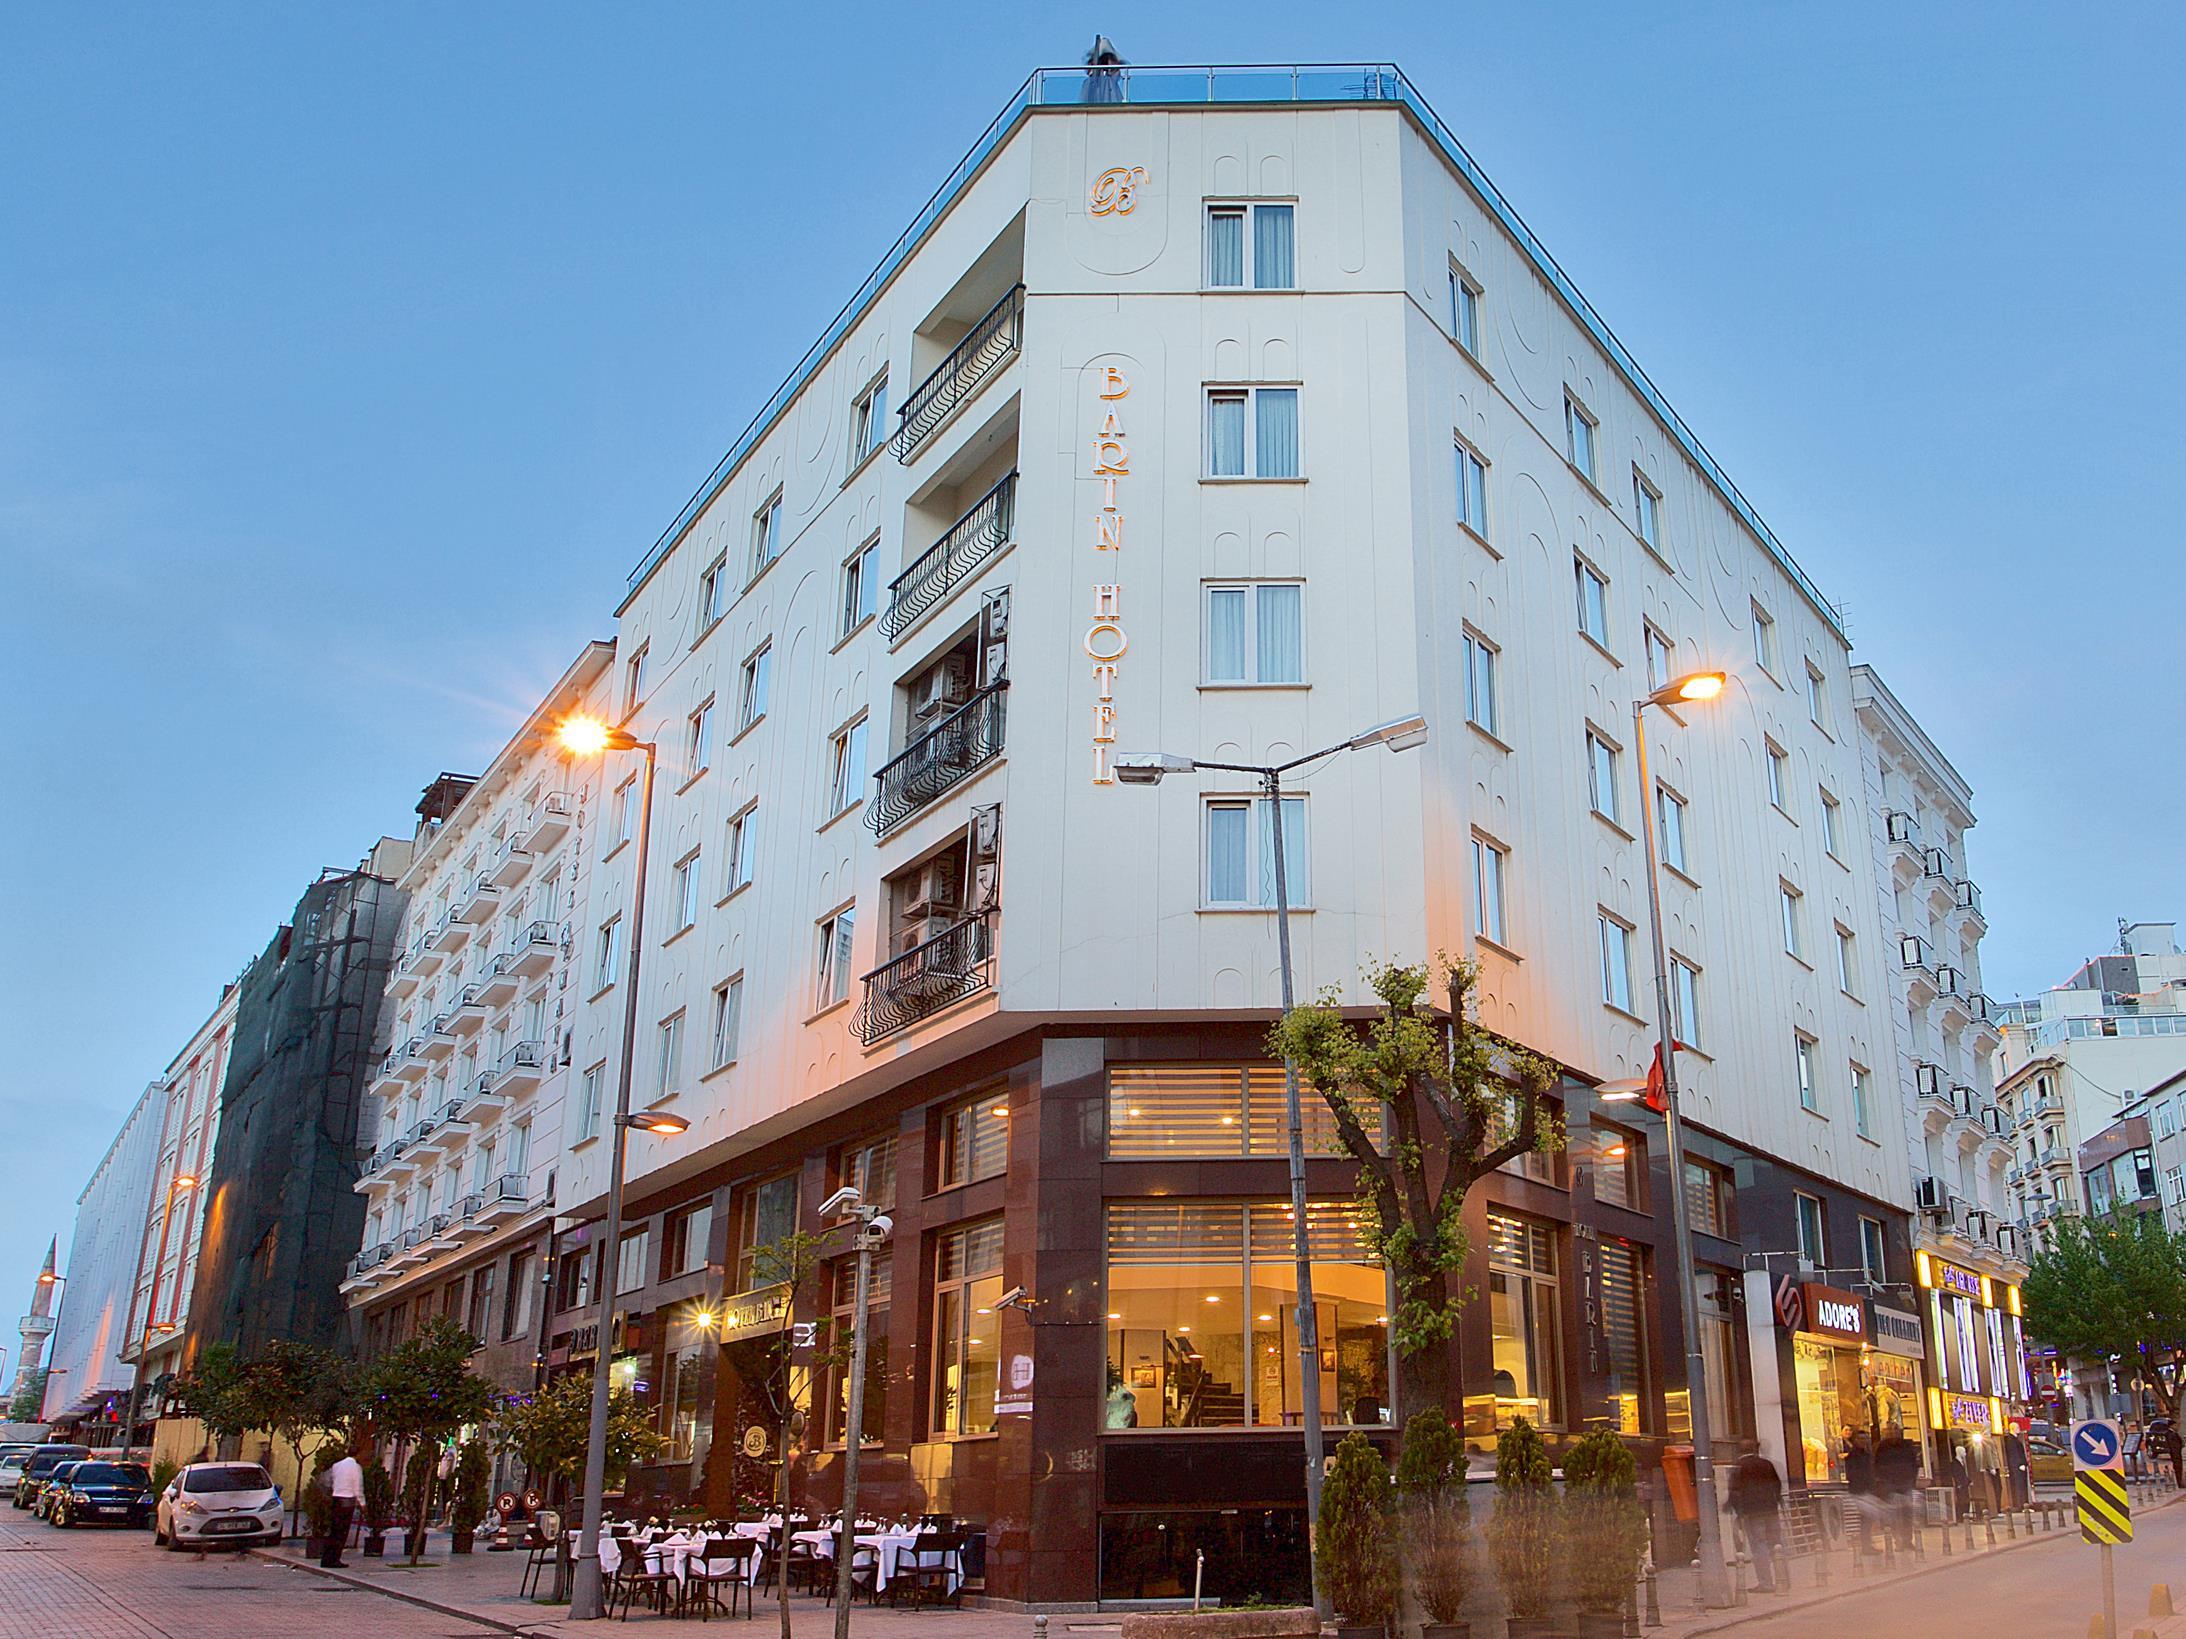 Barin Hotel Istanbul FAQ 2016, What facilities are there in Barin Hotel Istanbul 2016, What Languages Spoken are Supported in Barin Hotel Istanbul 2016, Which payment cards are accepted in Barin Hotel Istanbul , Istanbul Barin Hotel room facilities and services Q&A 2016, Istanbul Barin Hotel online booking services 2016, Istanbul Barin Hotel address 2016, Istanbul Barin Hotel telephone number 2016,Istanbul Barin Hotel map 2016, Istanbul Barin Hotel traffic guide 2016, how to go Istanbul Barin Hotel, Istanbul Barin Hotel booking online 2016, Istanbul Barin Hotel room types 2016.